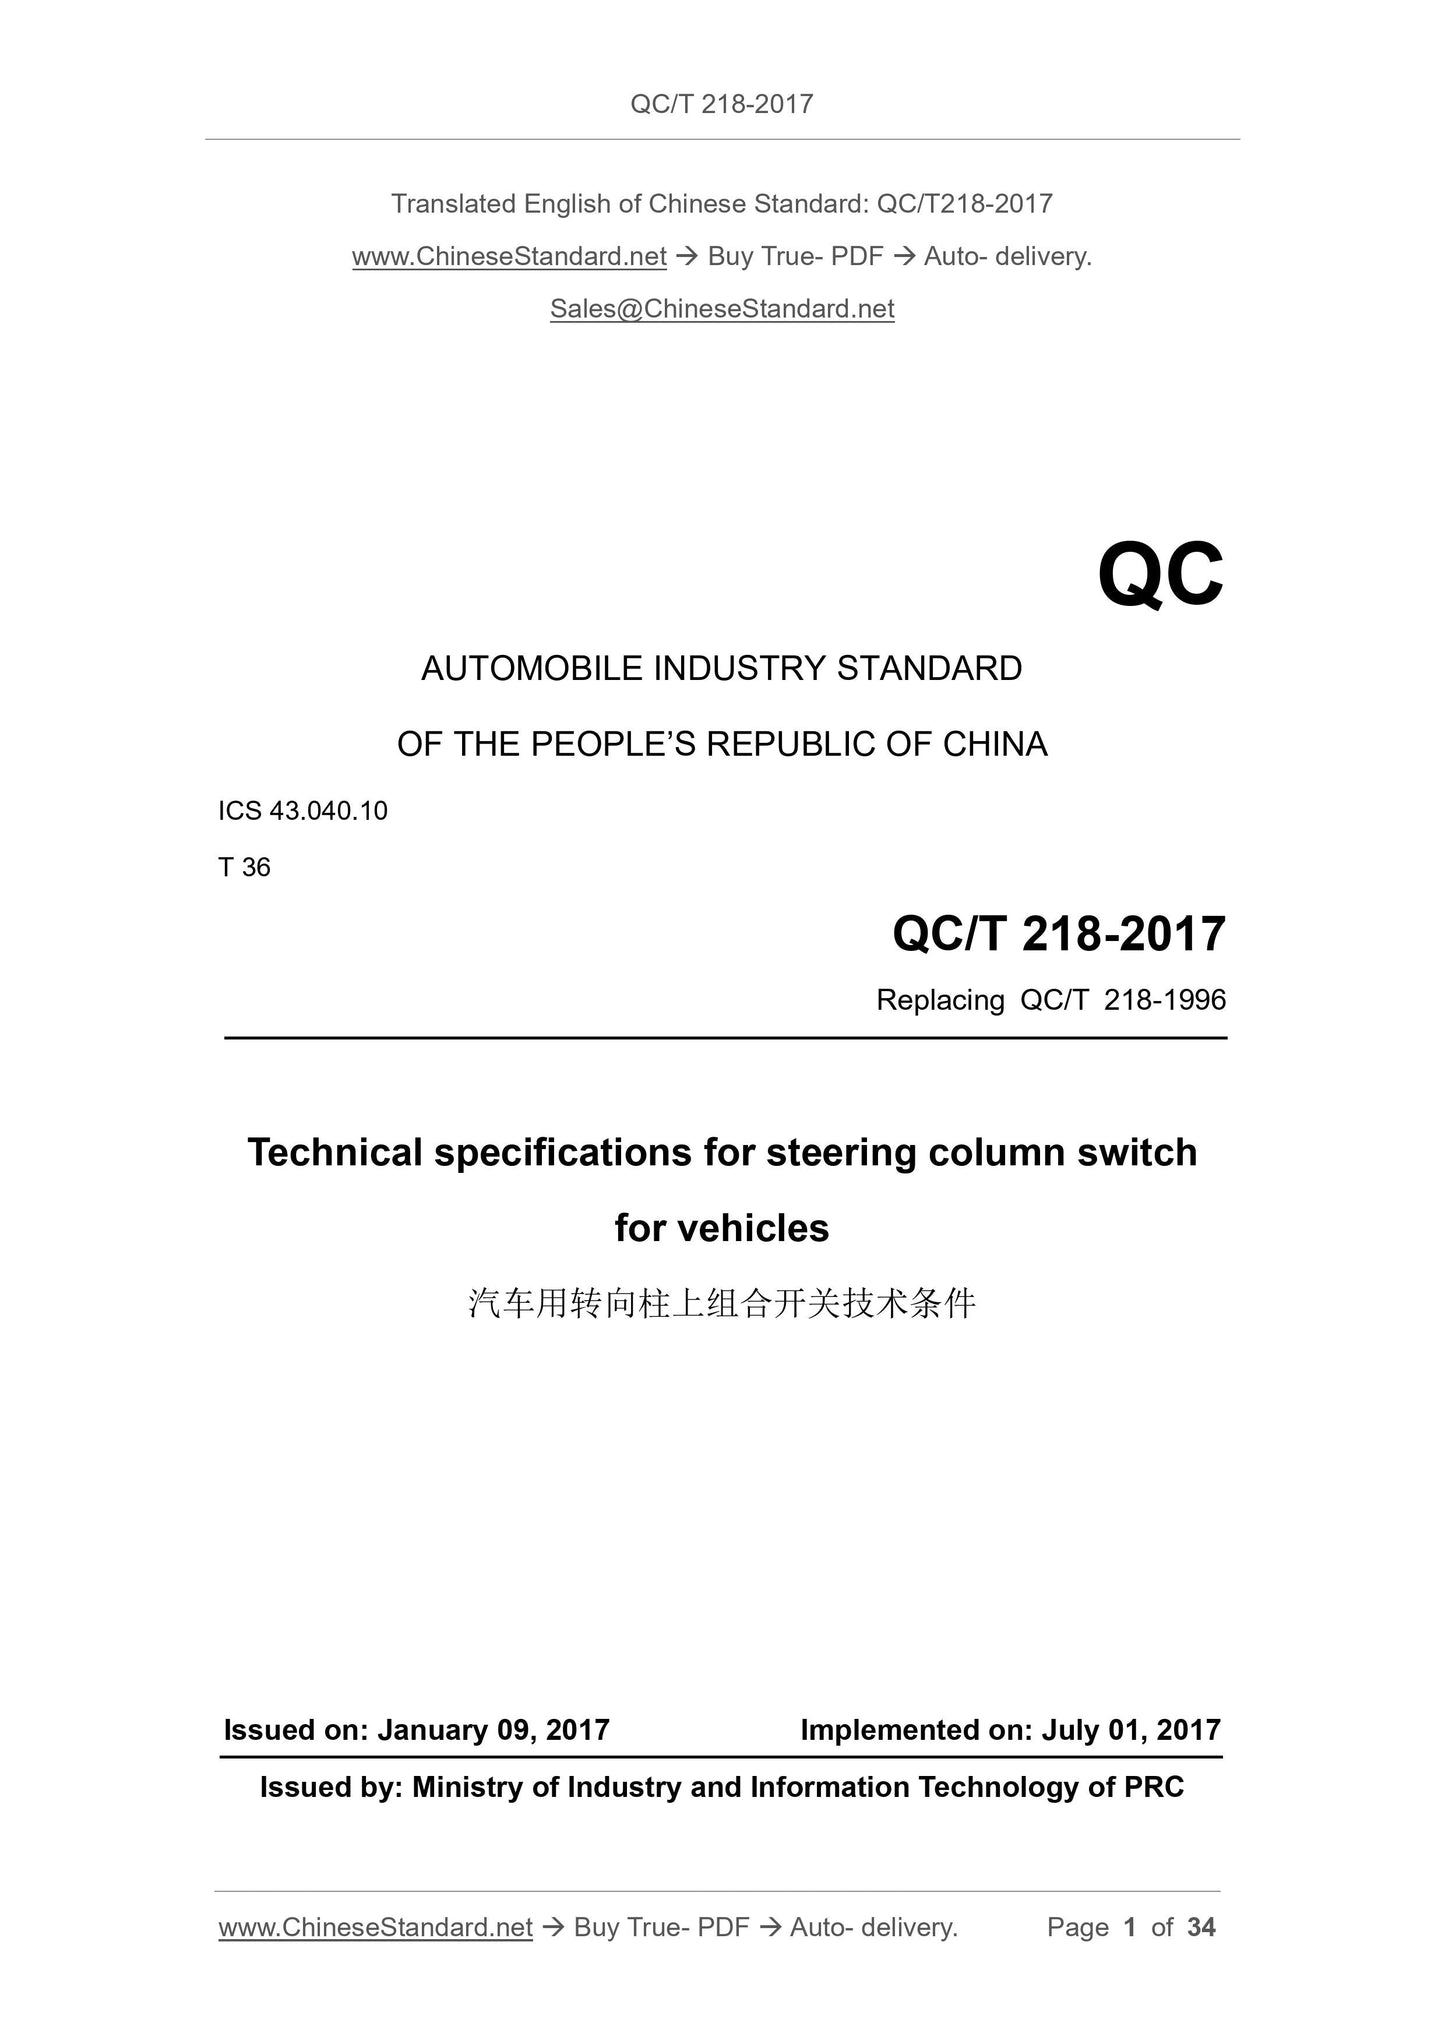 QC/T 218-2017 Page 1